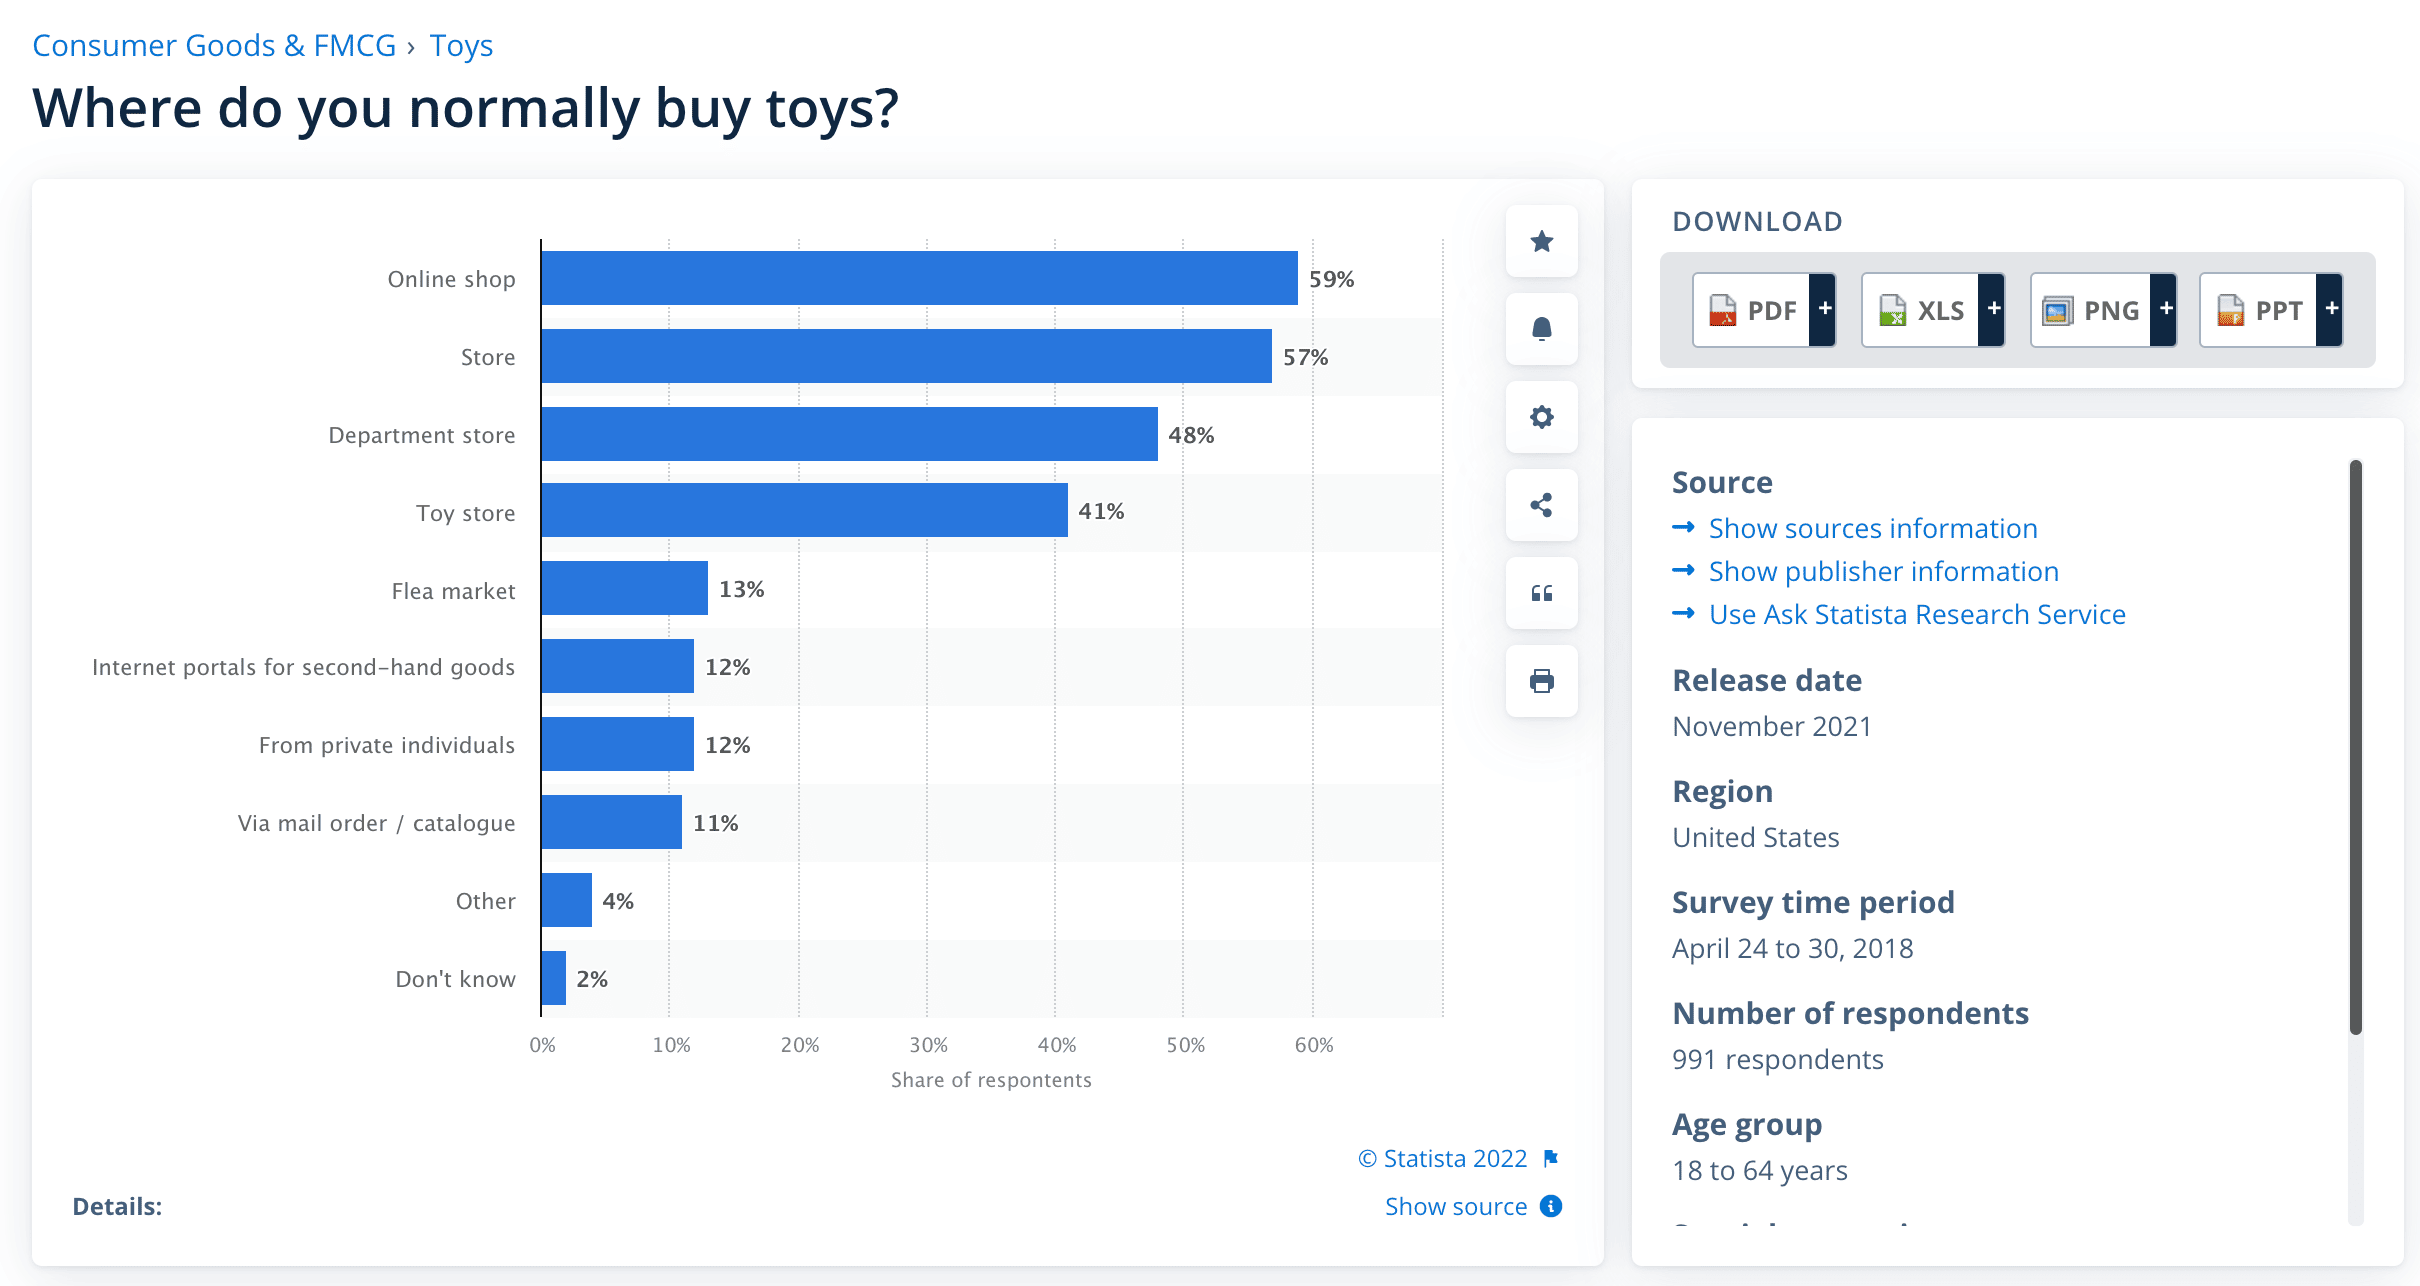 Most popular purchase channels for toys in the US 2020